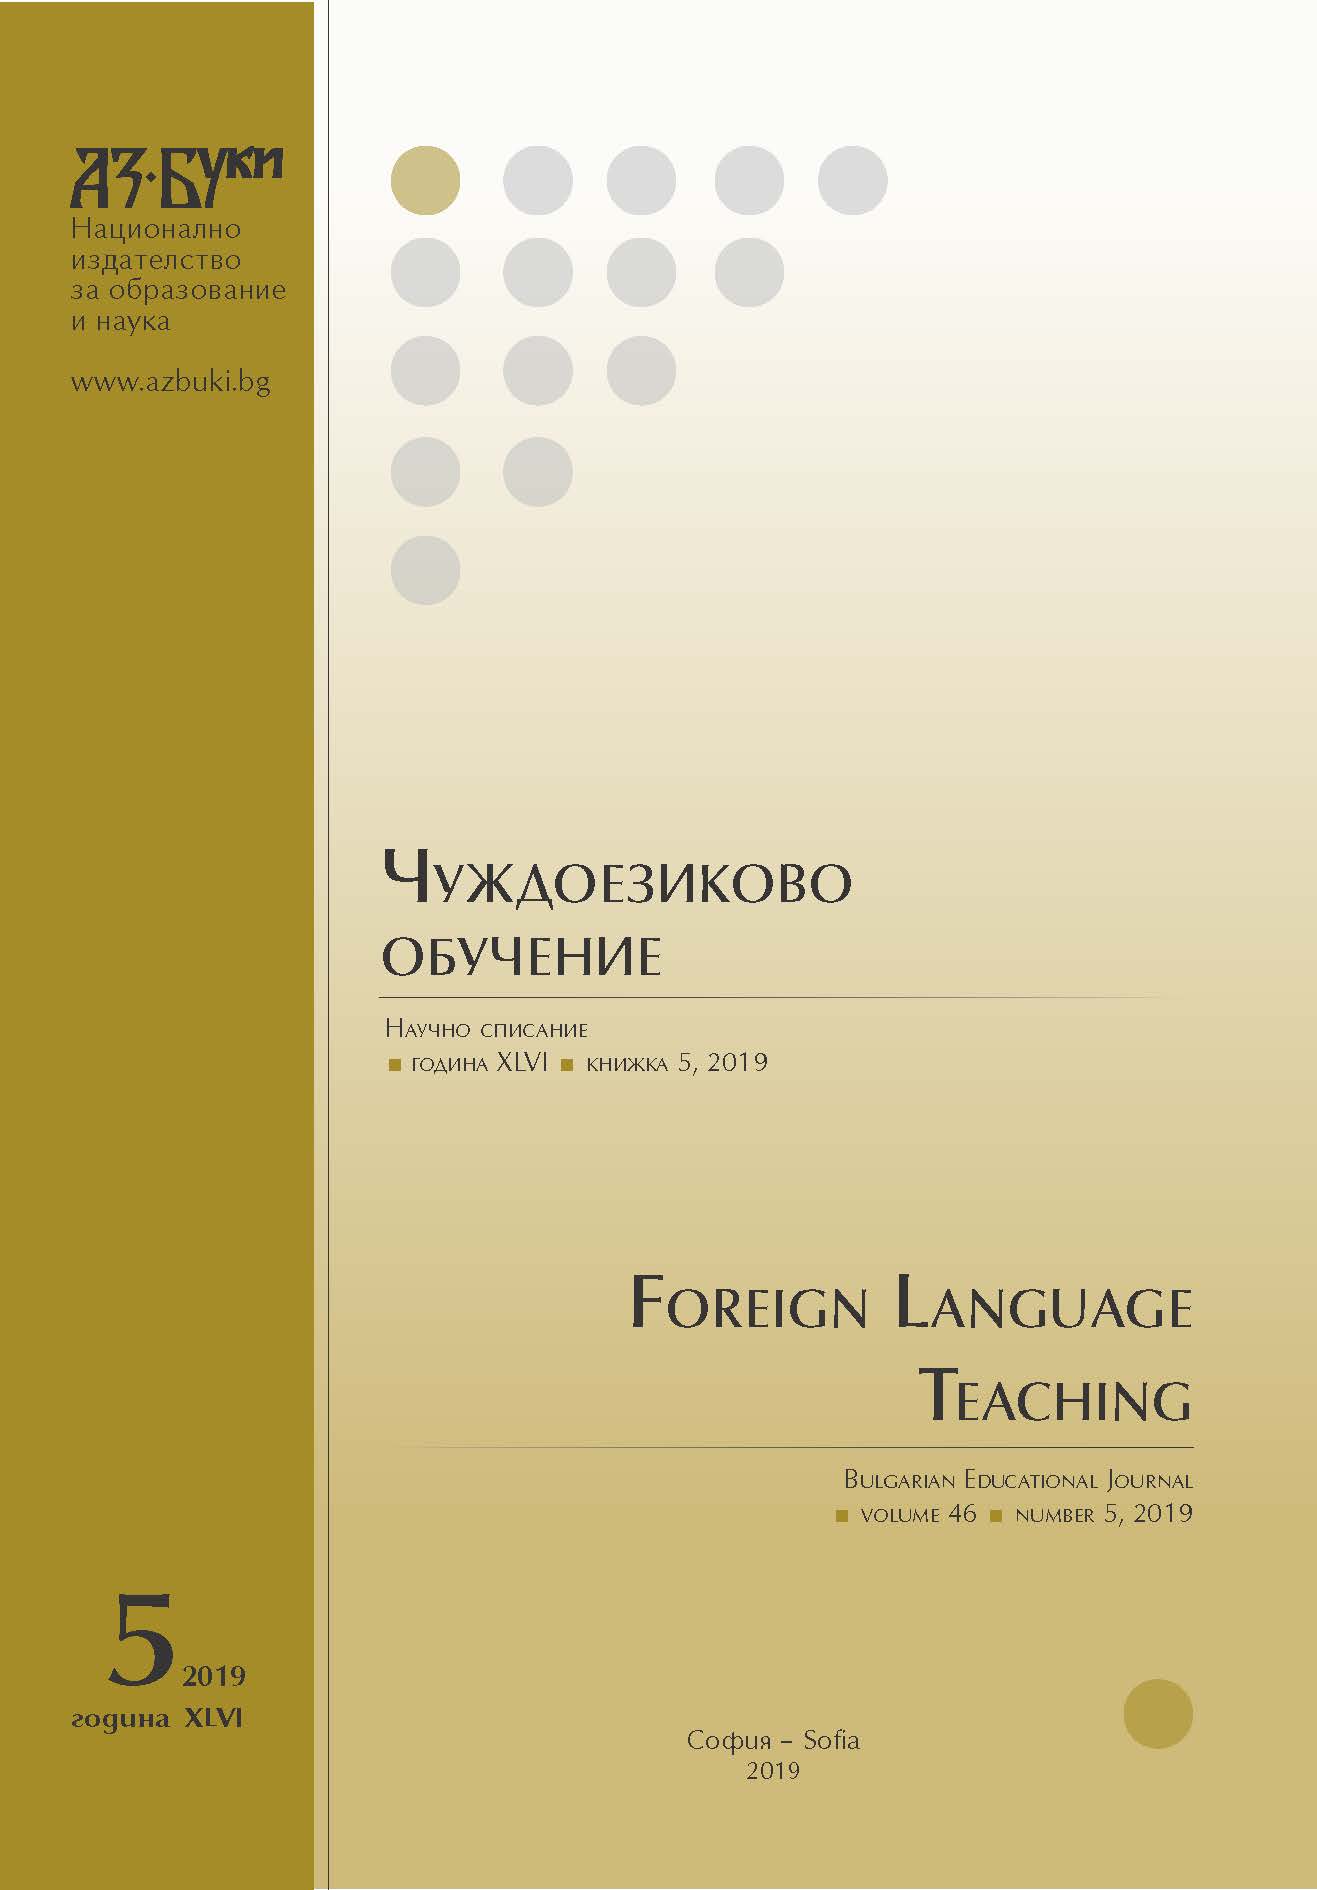 Summer Seminar for Norwegian Language Teachers at the University of Oslo Cover Image